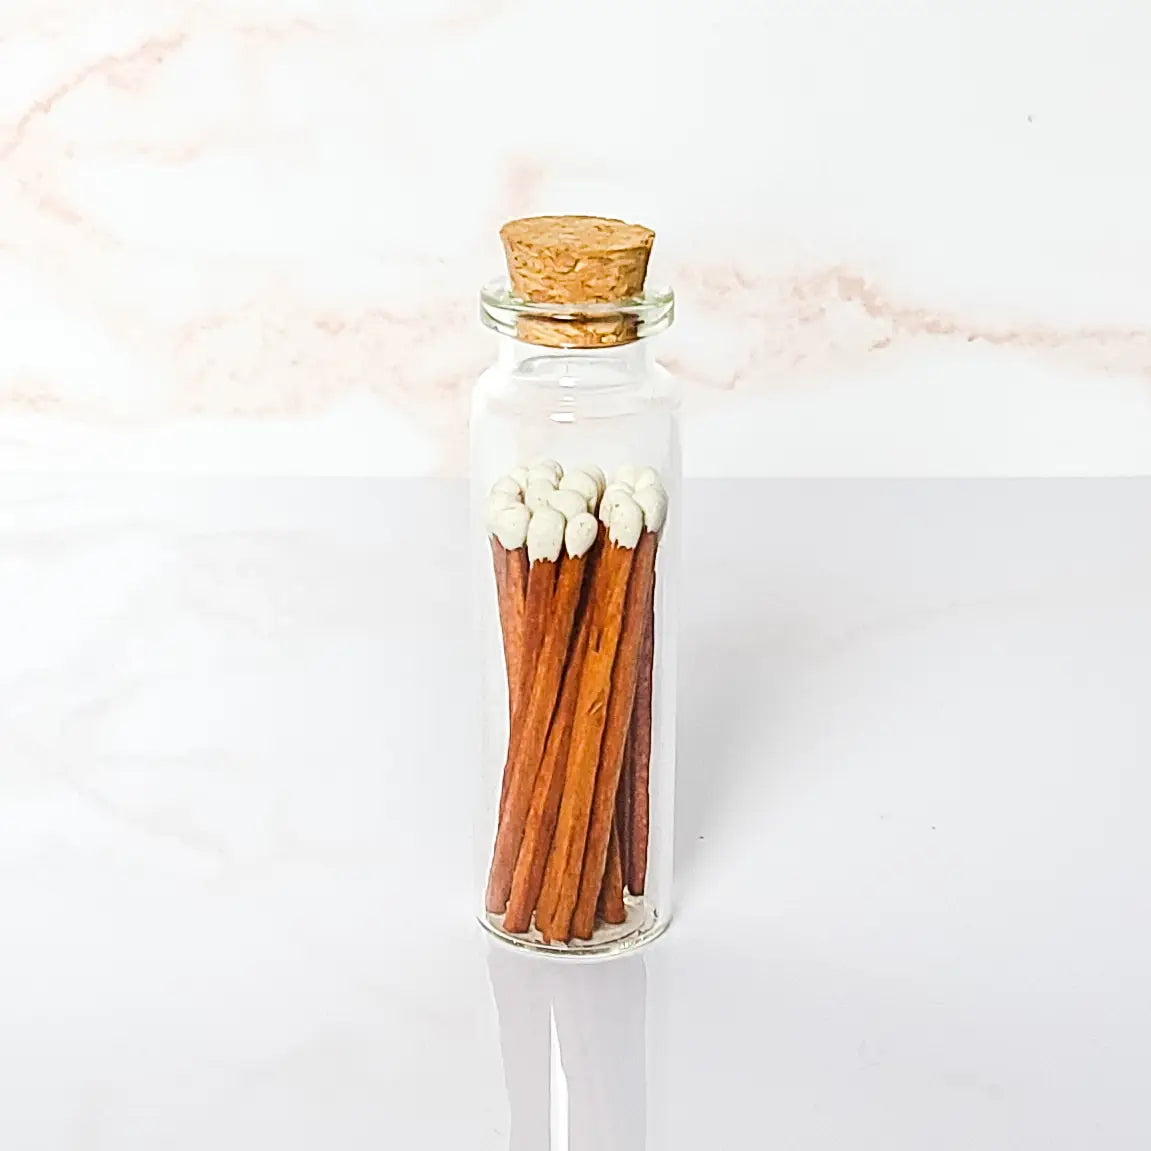 Petite Cinnamon Matches in Corked Vial